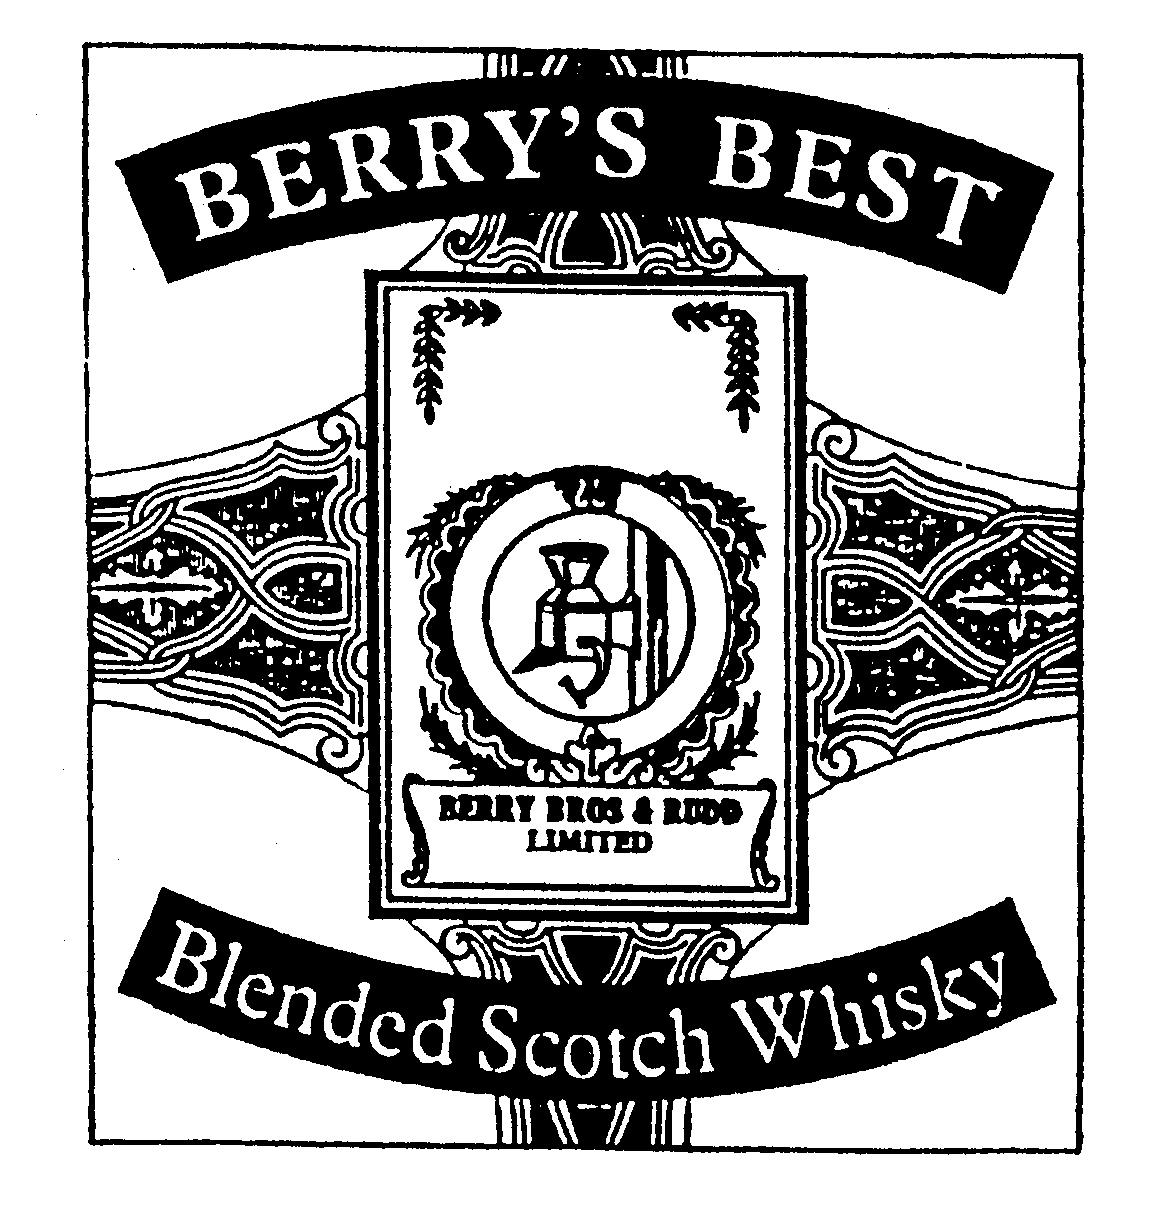  BERRY'S BEST BLENDED SCOTCH WHISKEY BERRY BROS &amp; RUDD LIMITED